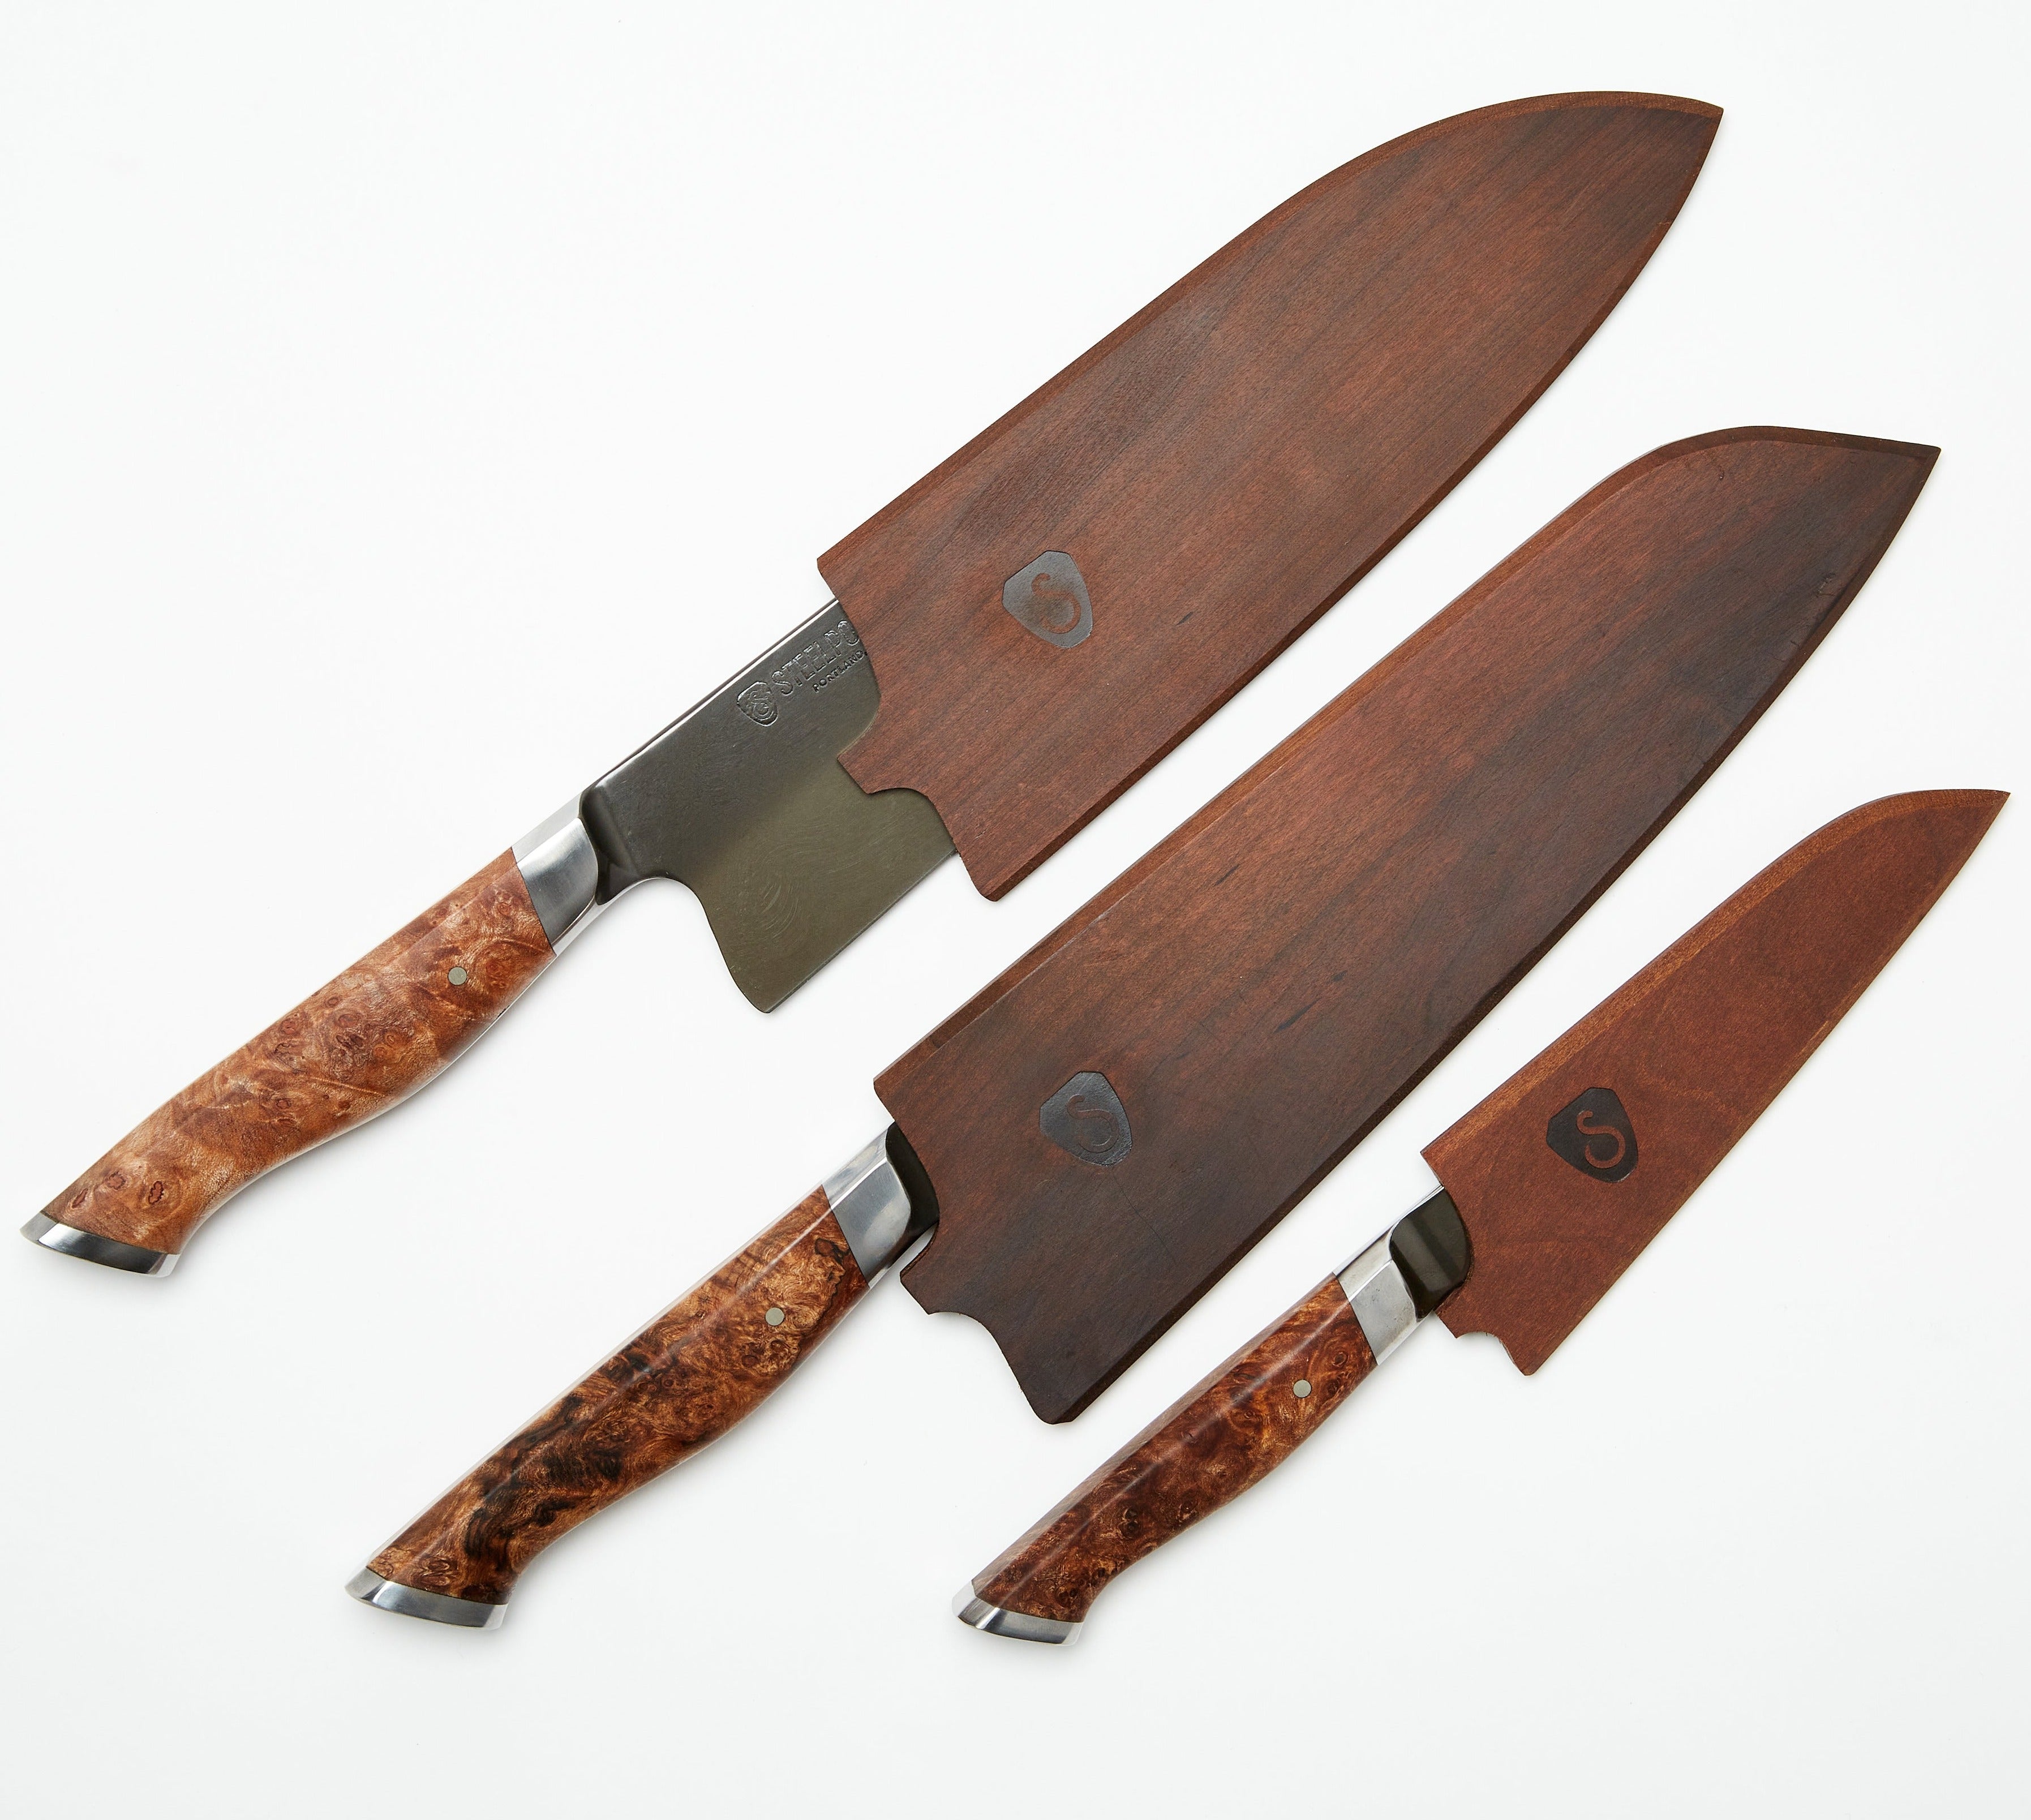 Chopwell Carbon Steel and Ash Wood 3 Piece Knife Set by World Market